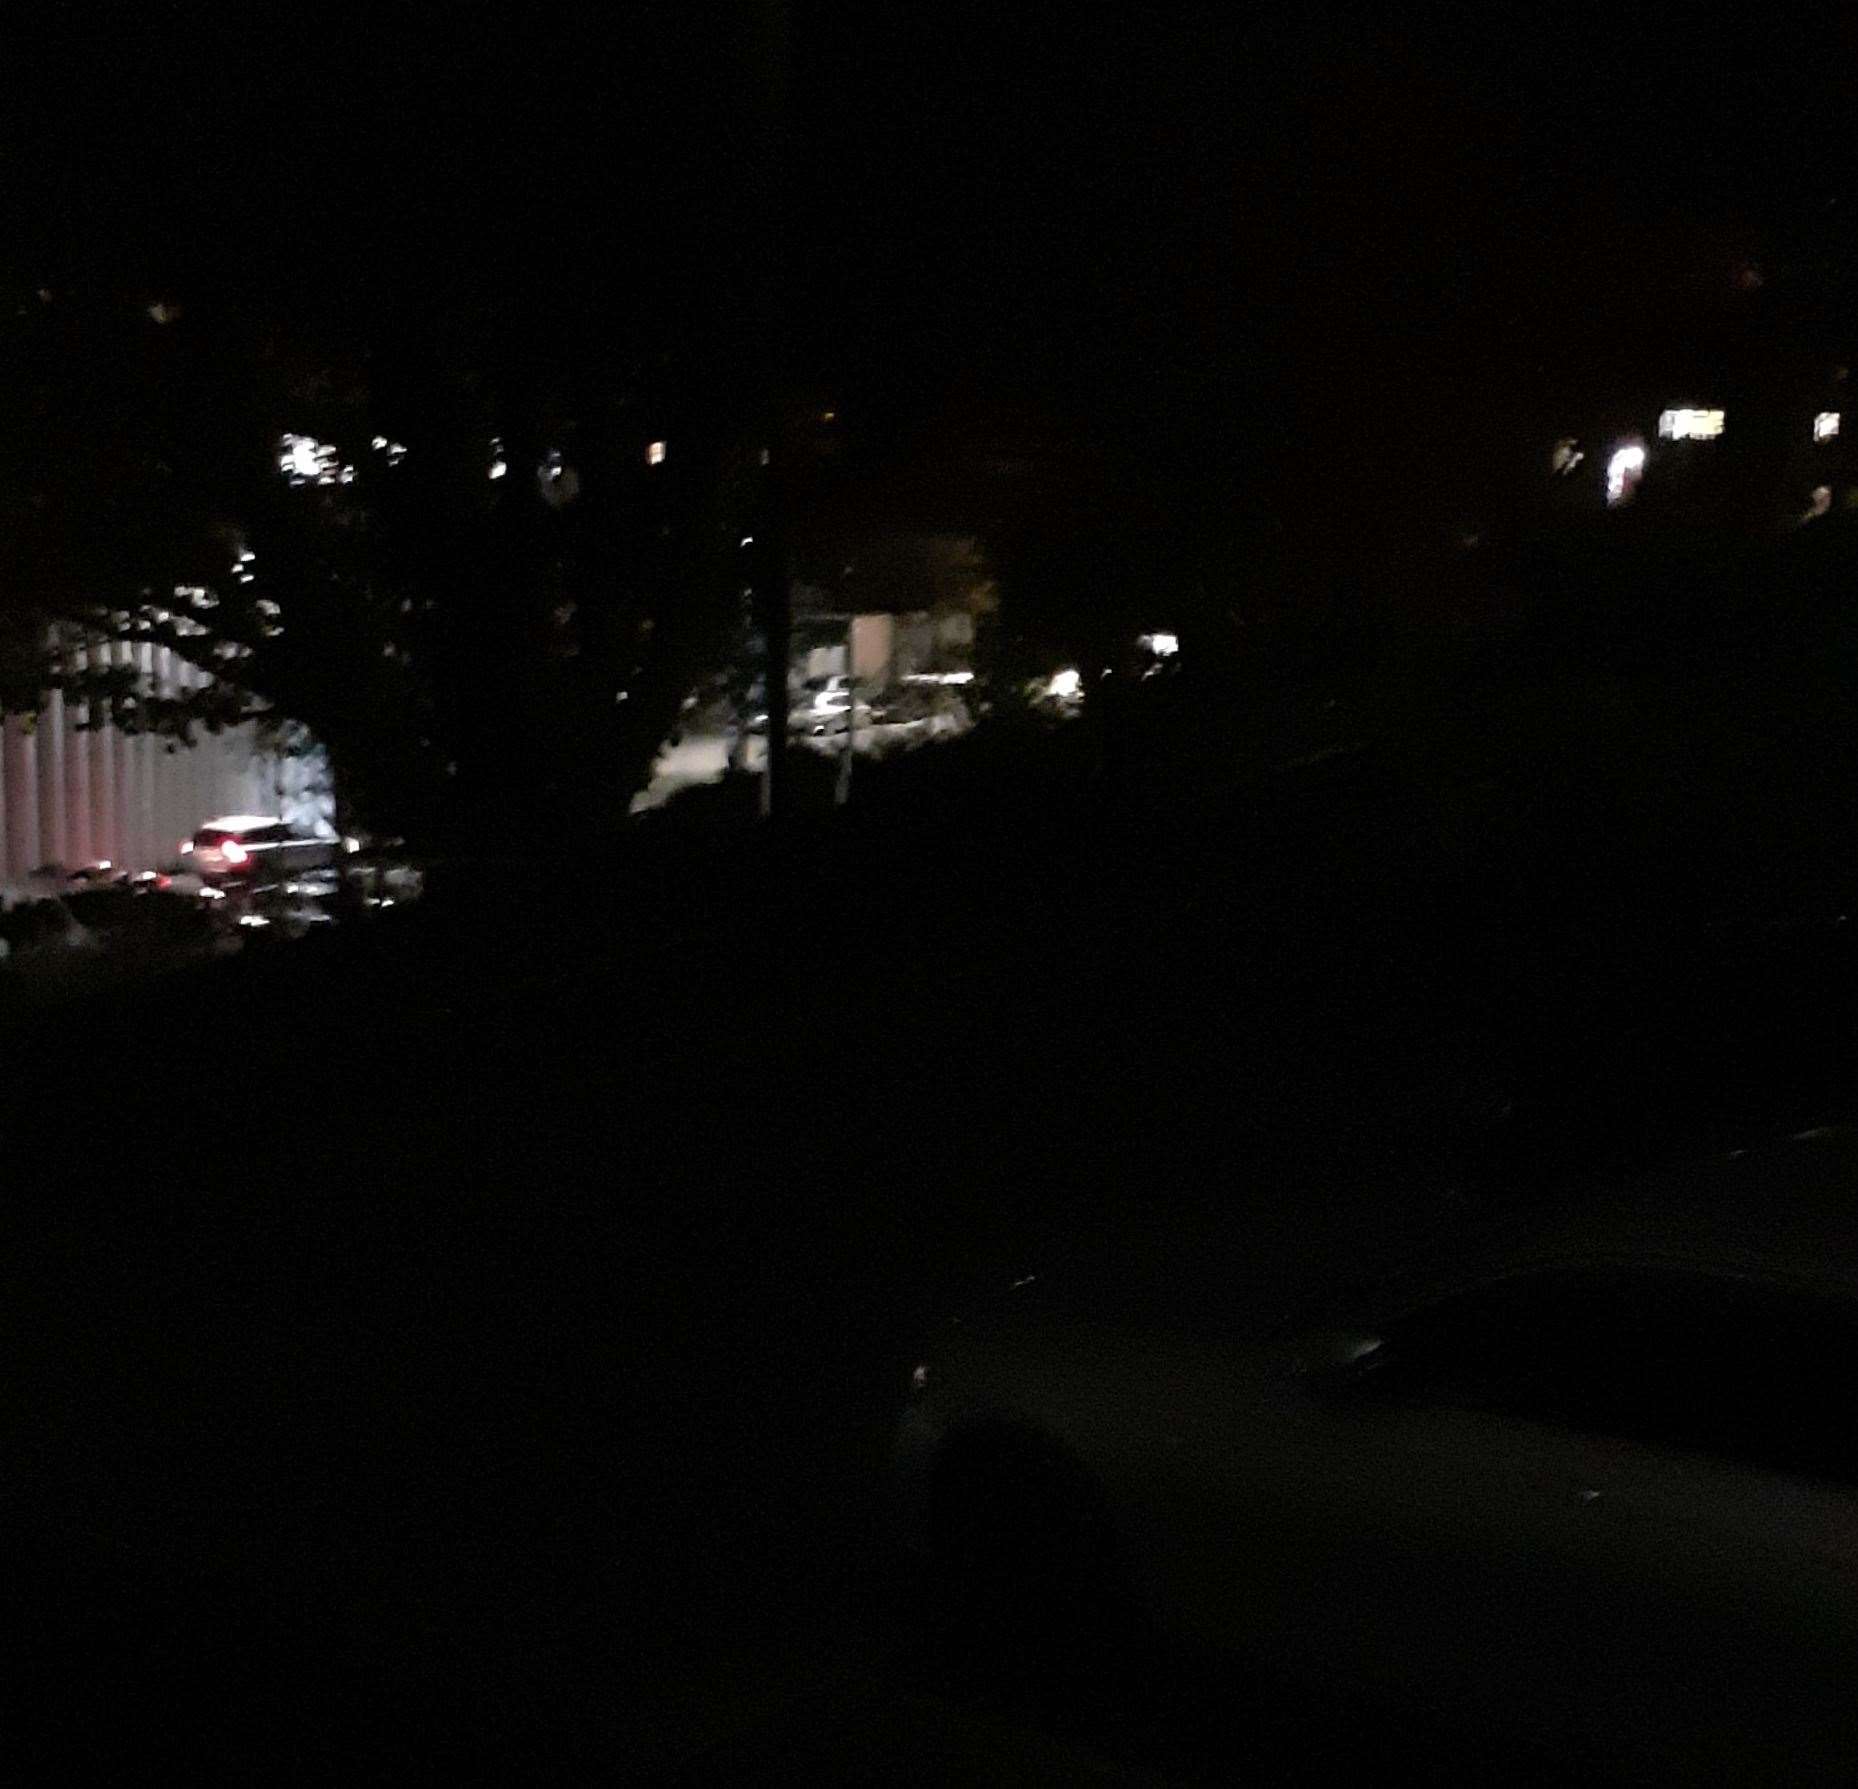 The lights are off at Payers Park and car park in Folkestone, making residents scared to enter at night. All pictures: Elaine Nicholson